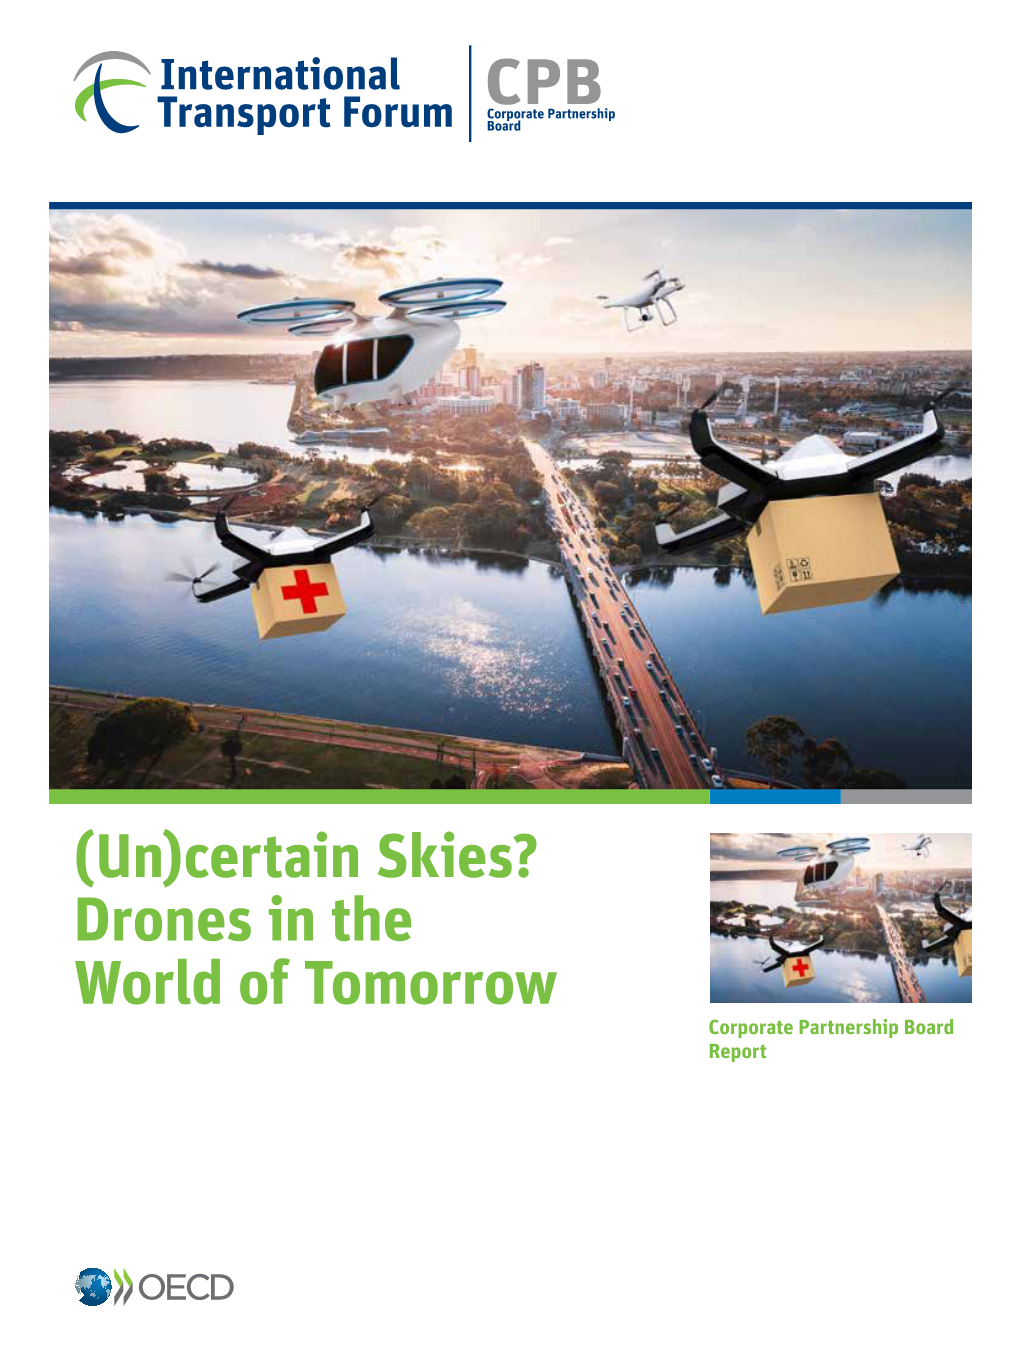 (Un)Certain Skies? Drones in the World of Tomorrow